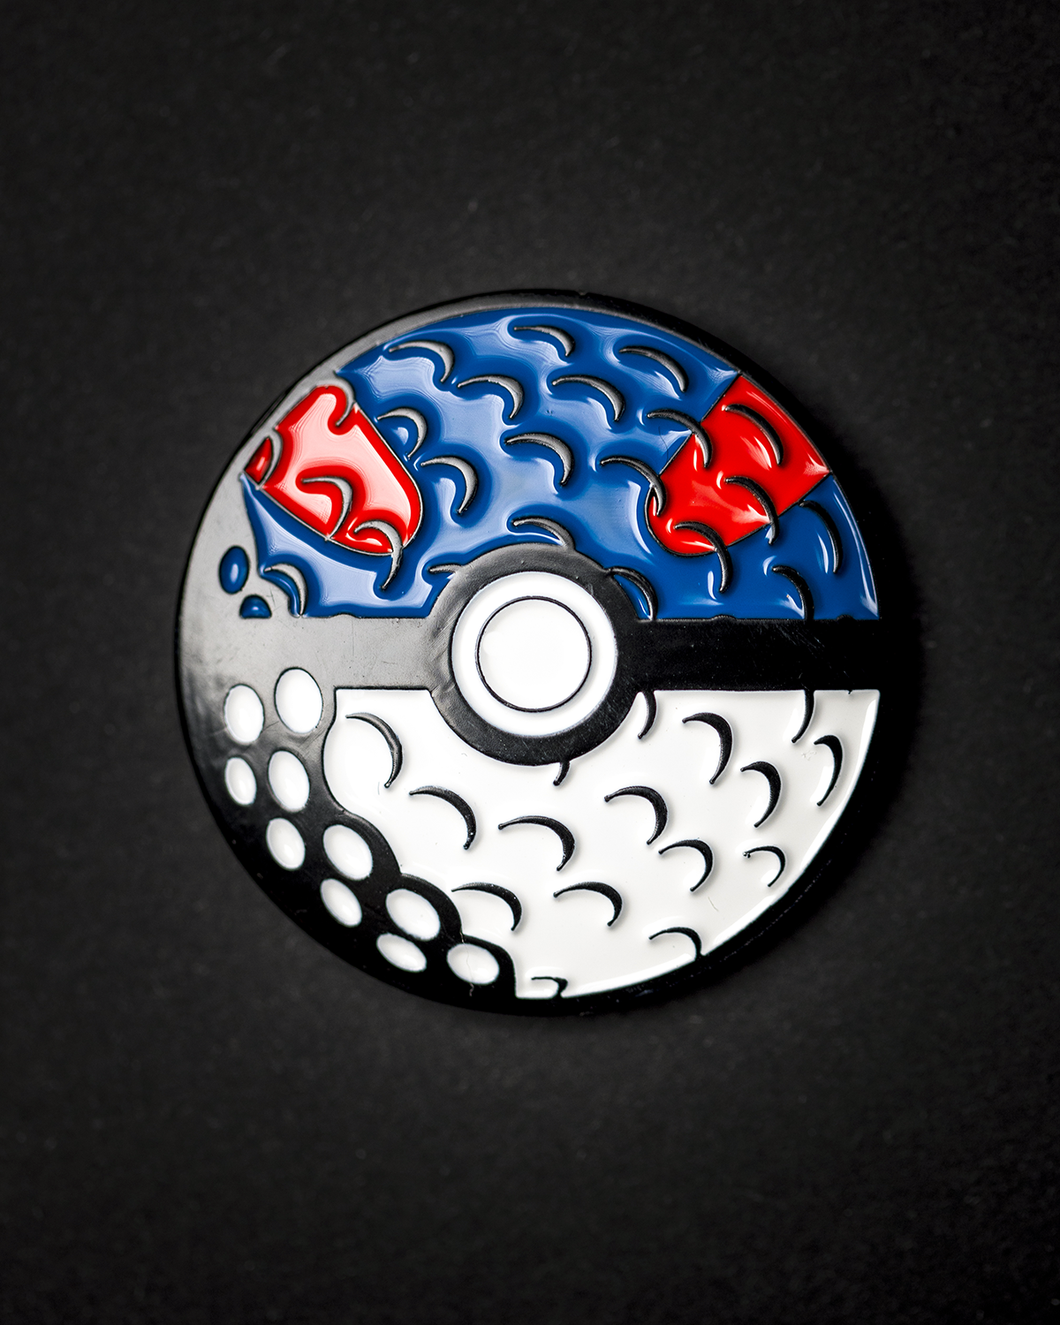 Catch Em All Ball Marker - Great Edition